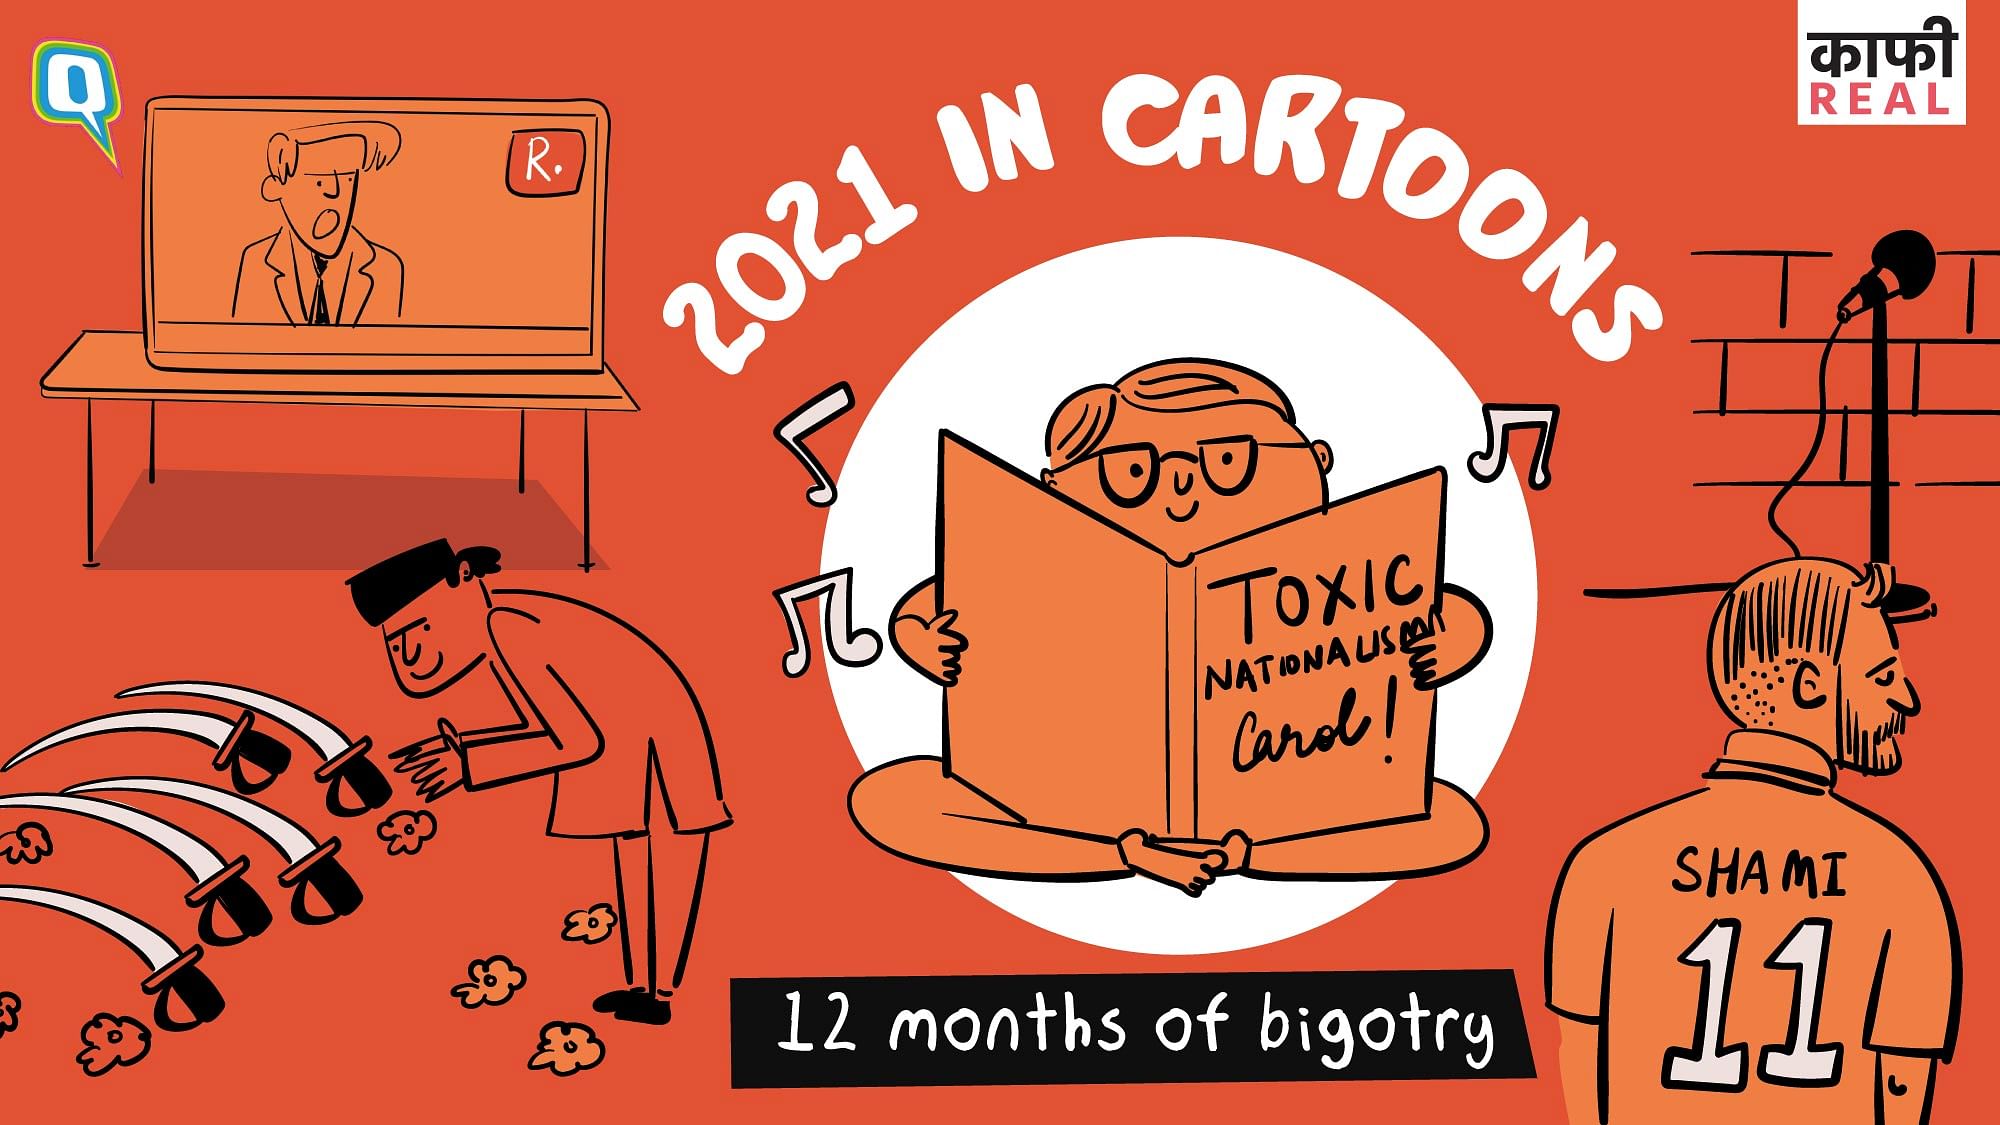 <div class="paragraphs"><p>Here's our 'Year in Cartoons', Toxic Nationalism Edition.</p></div>